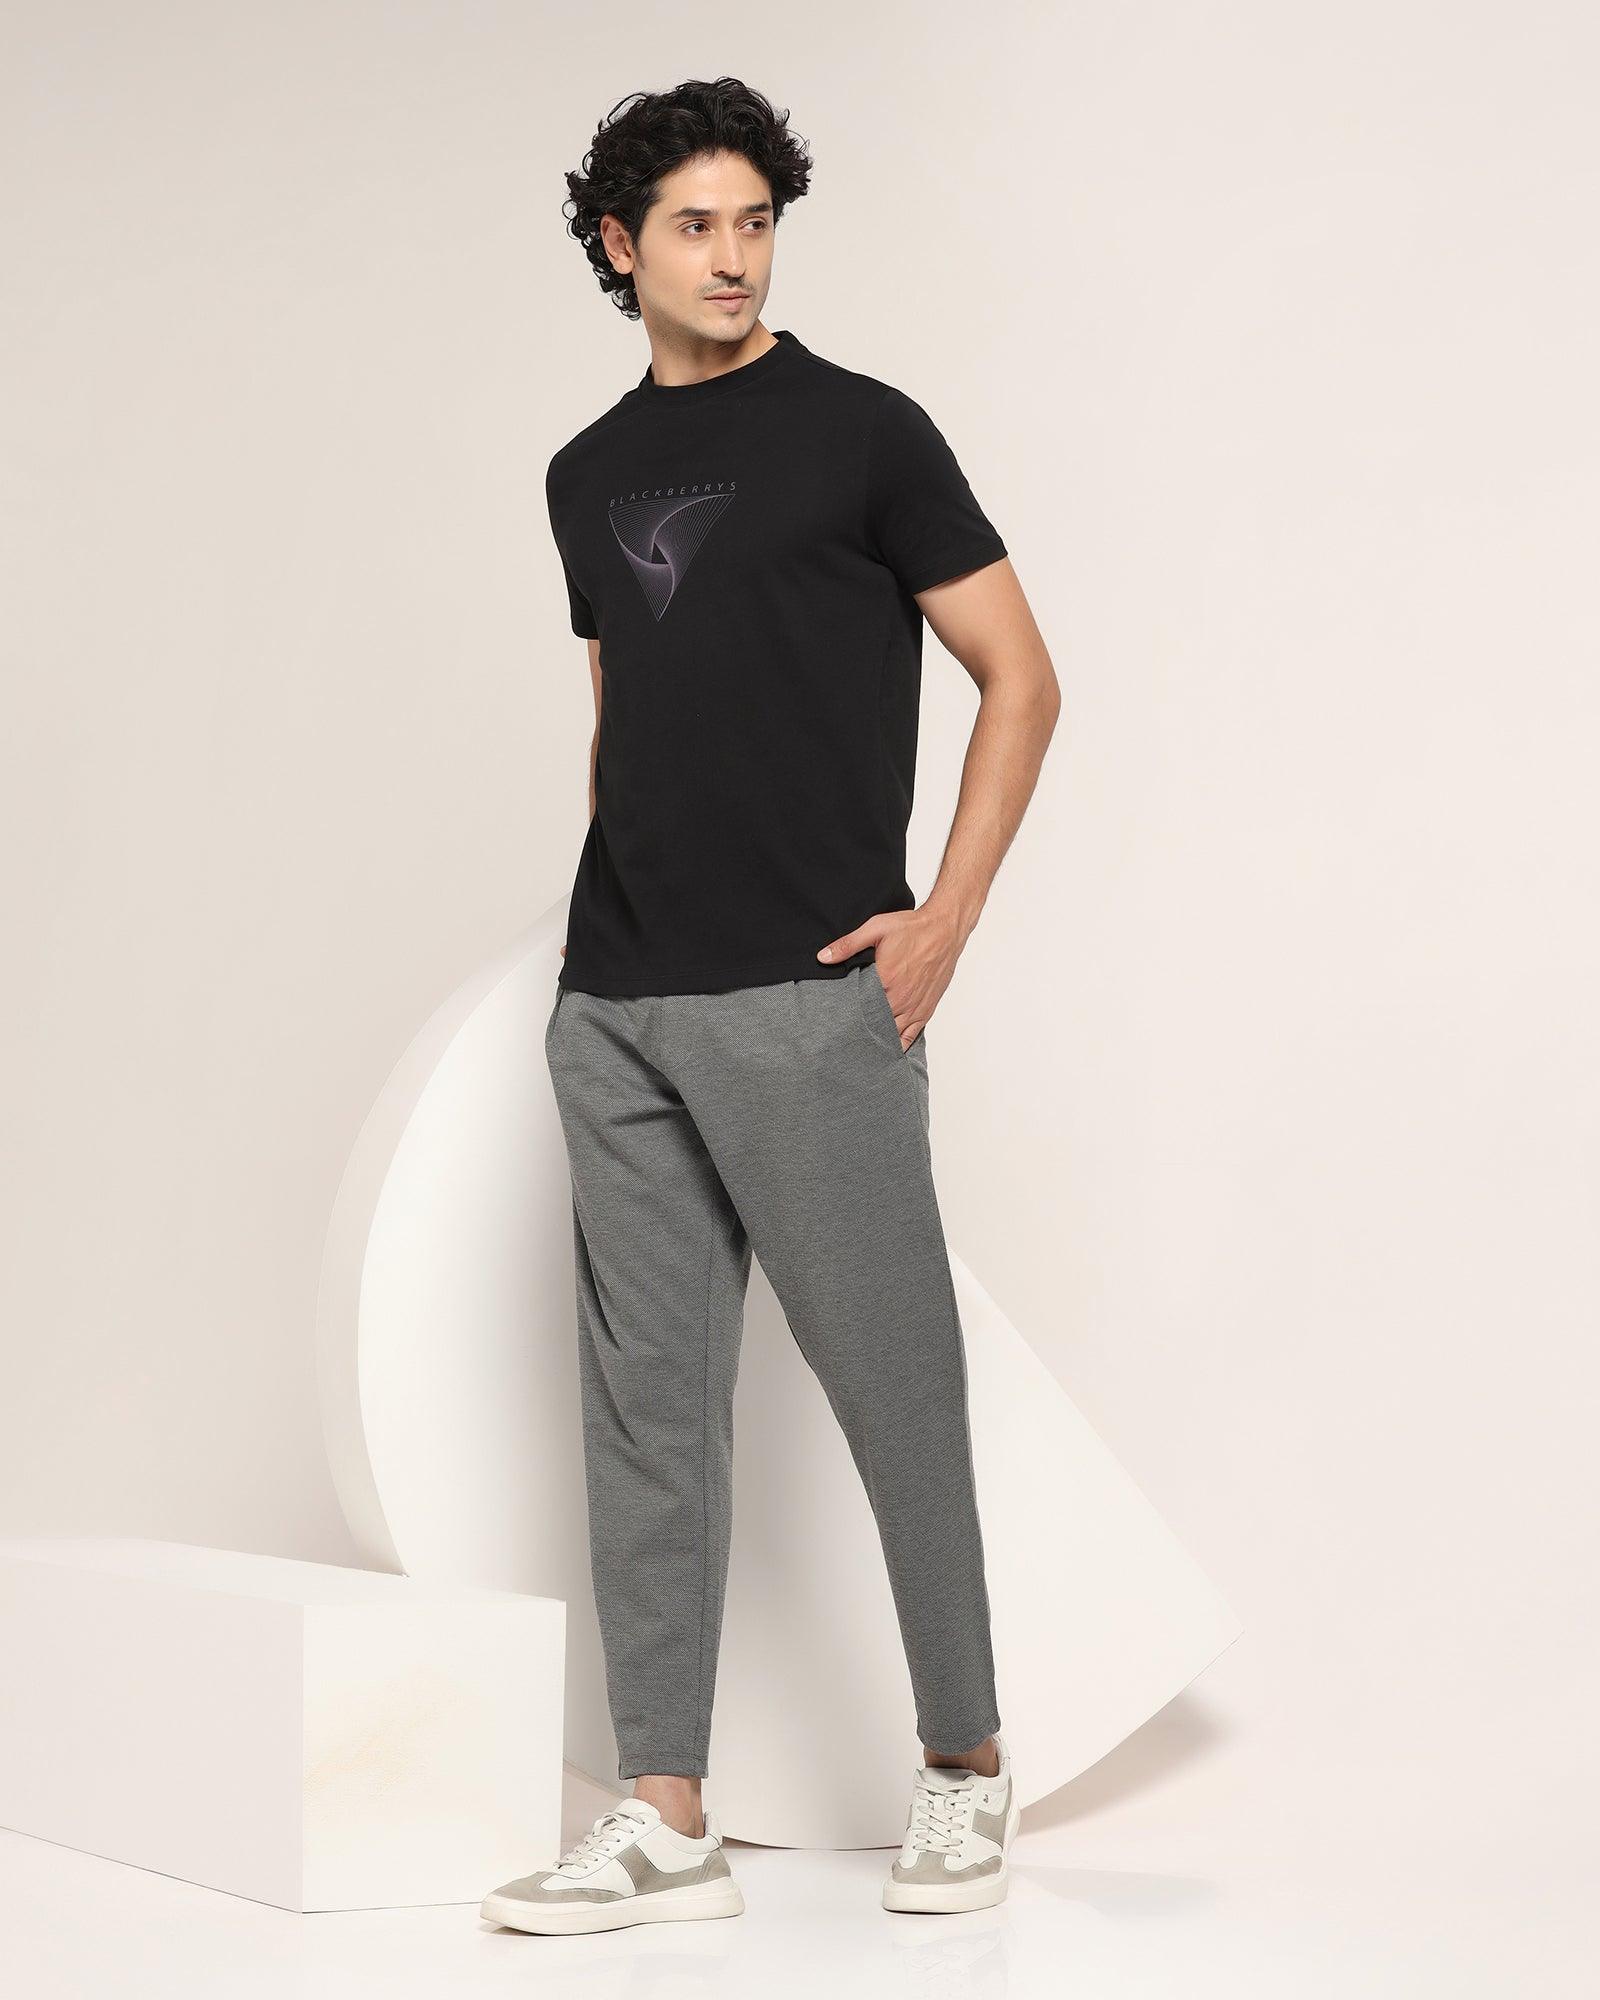 Which color trousers goes with grey shirt? - Quora